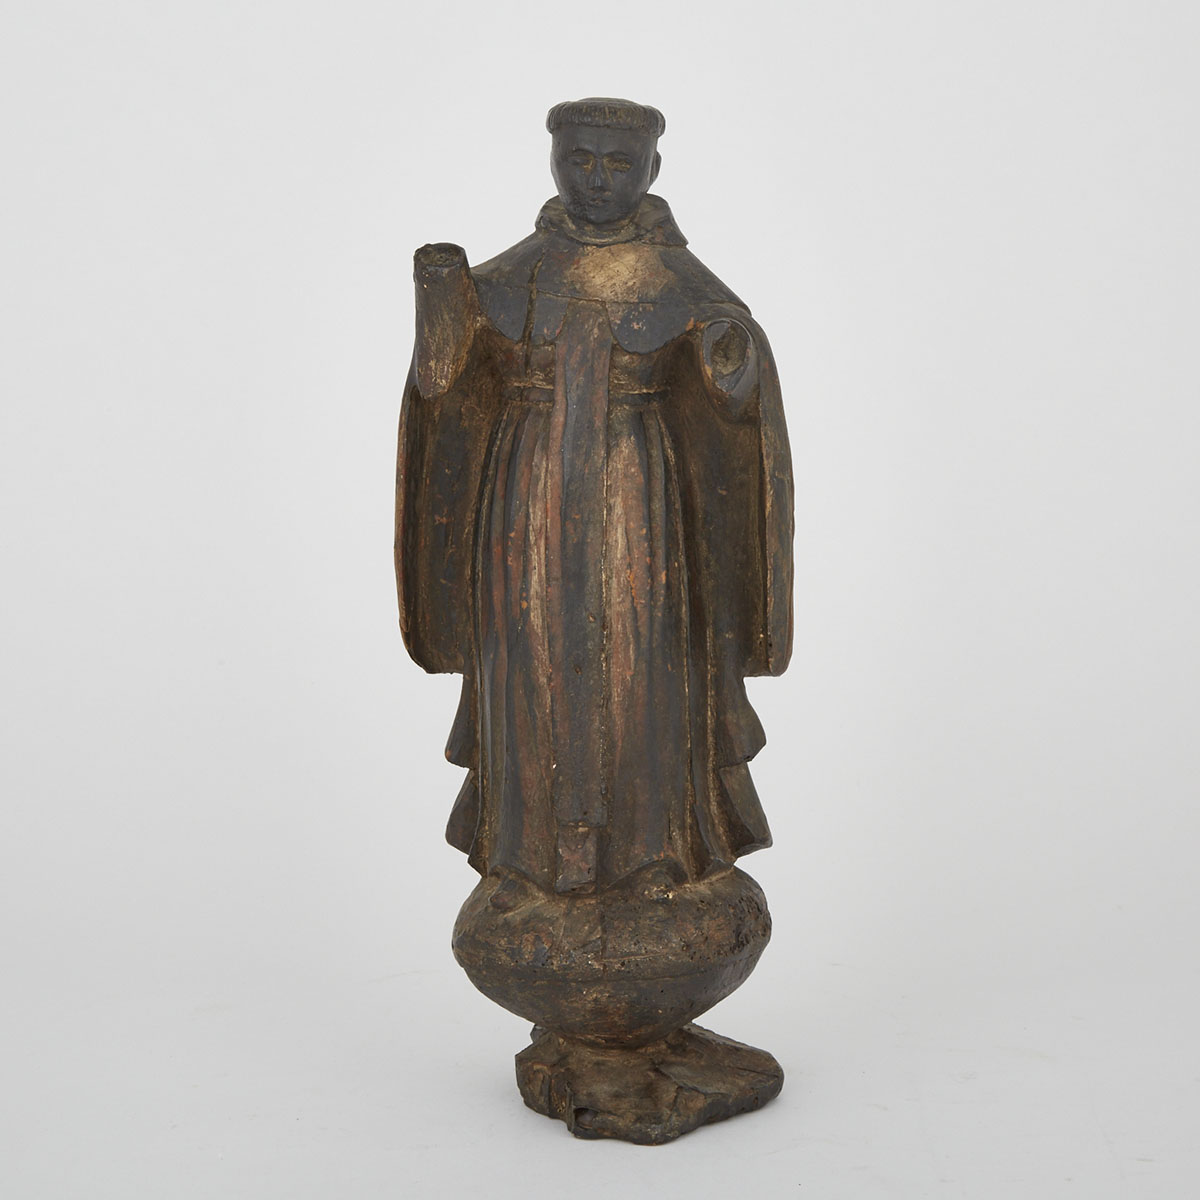 Spanish Colonial Carved Santos Figure, 18th century or earlier